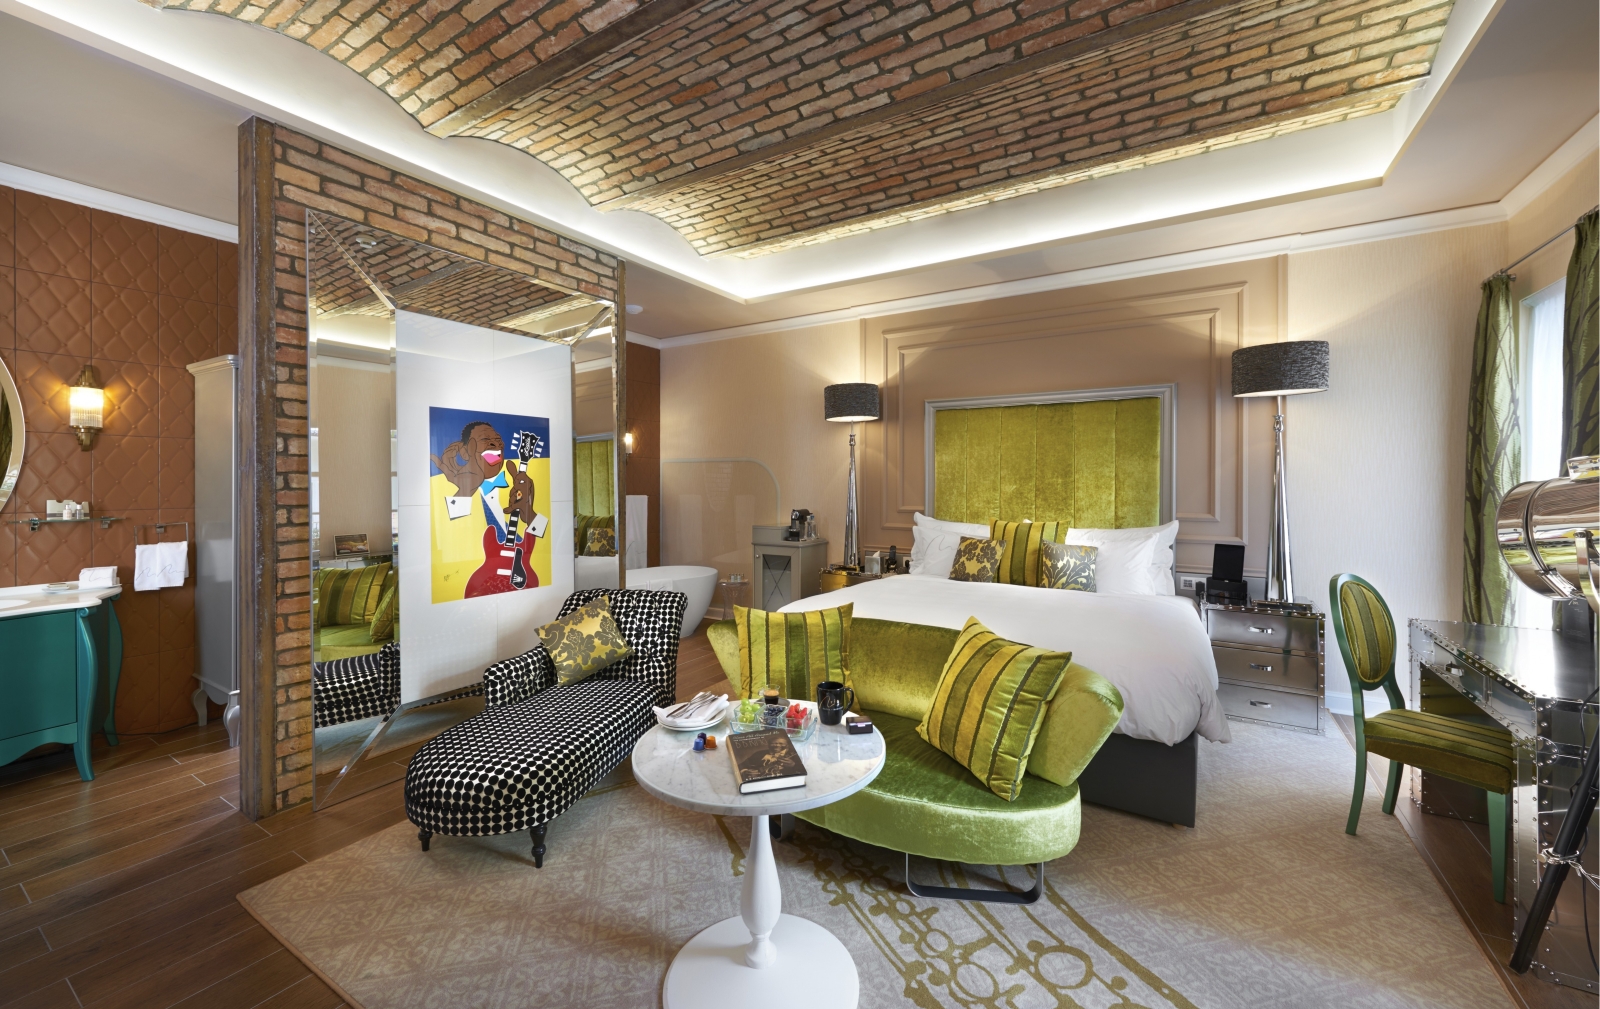 Signature Room in Jazz Wing in Aria Budapest in Hungary